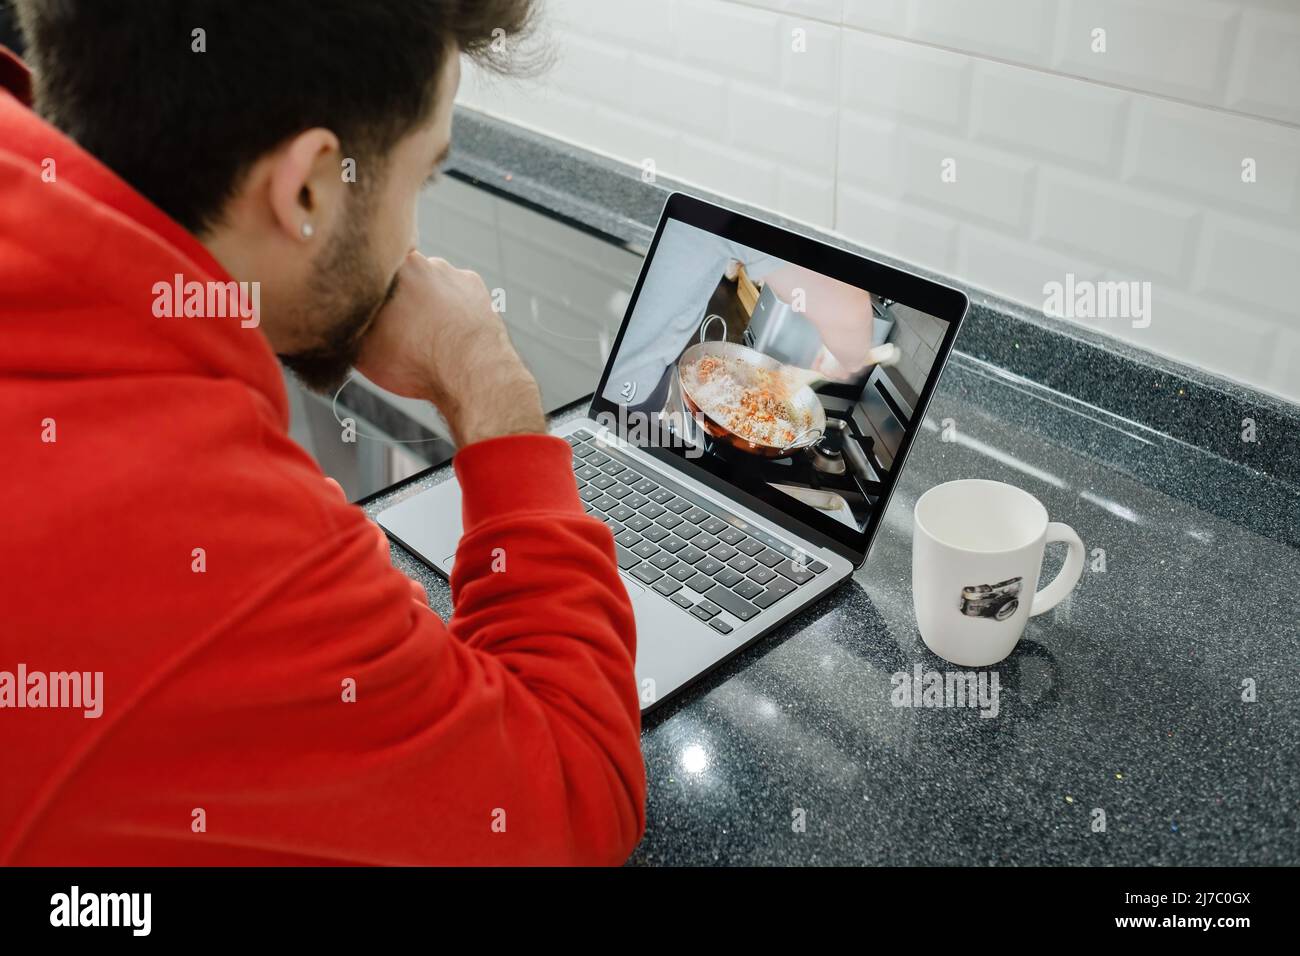 Recipe, young man is watching the steps to make tacos, black kitchen counter and laptop Stock Photo